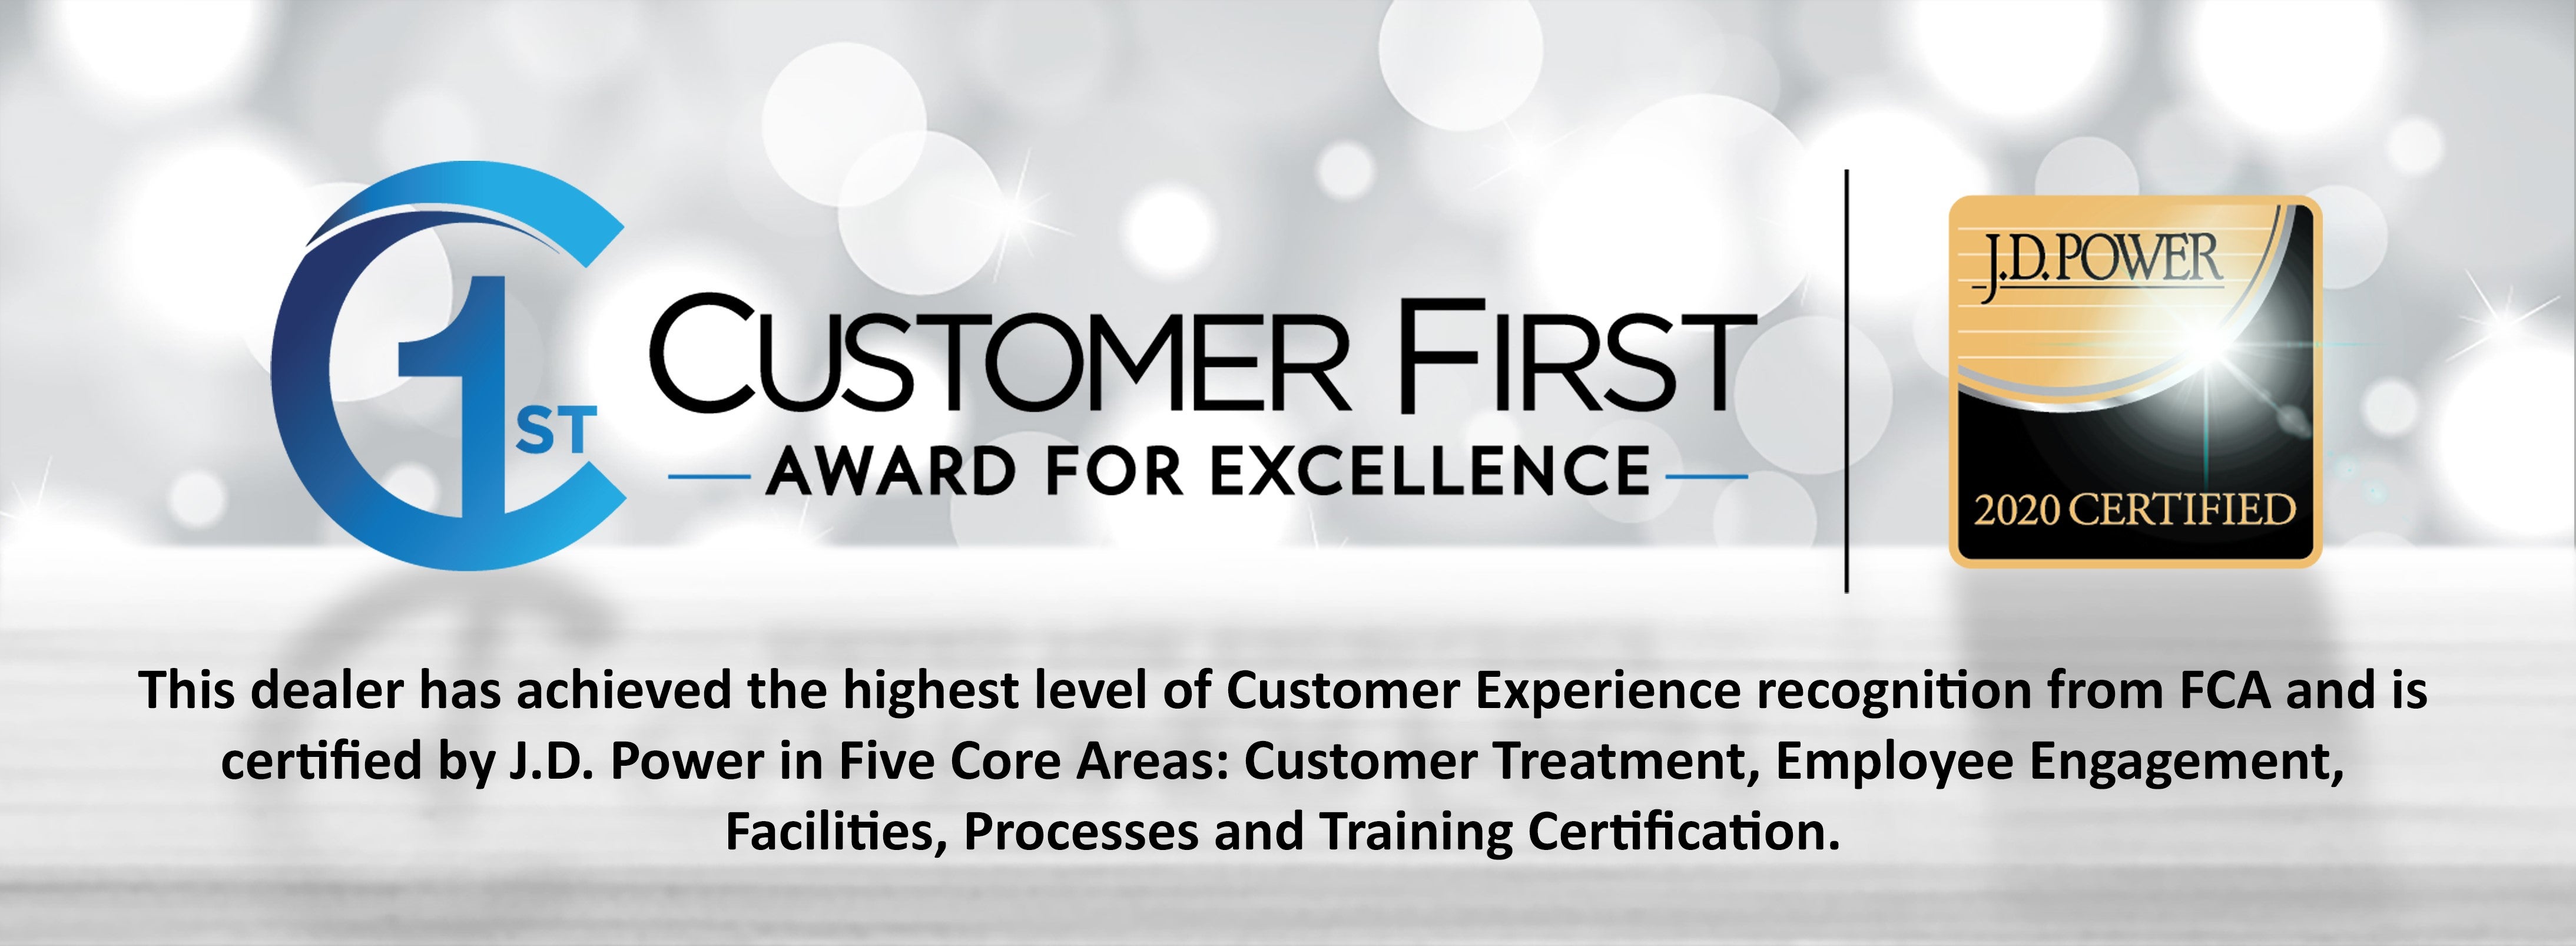 Customer First Award for Excellence for 2019 at CDJRDemo2 in Derwood, MD